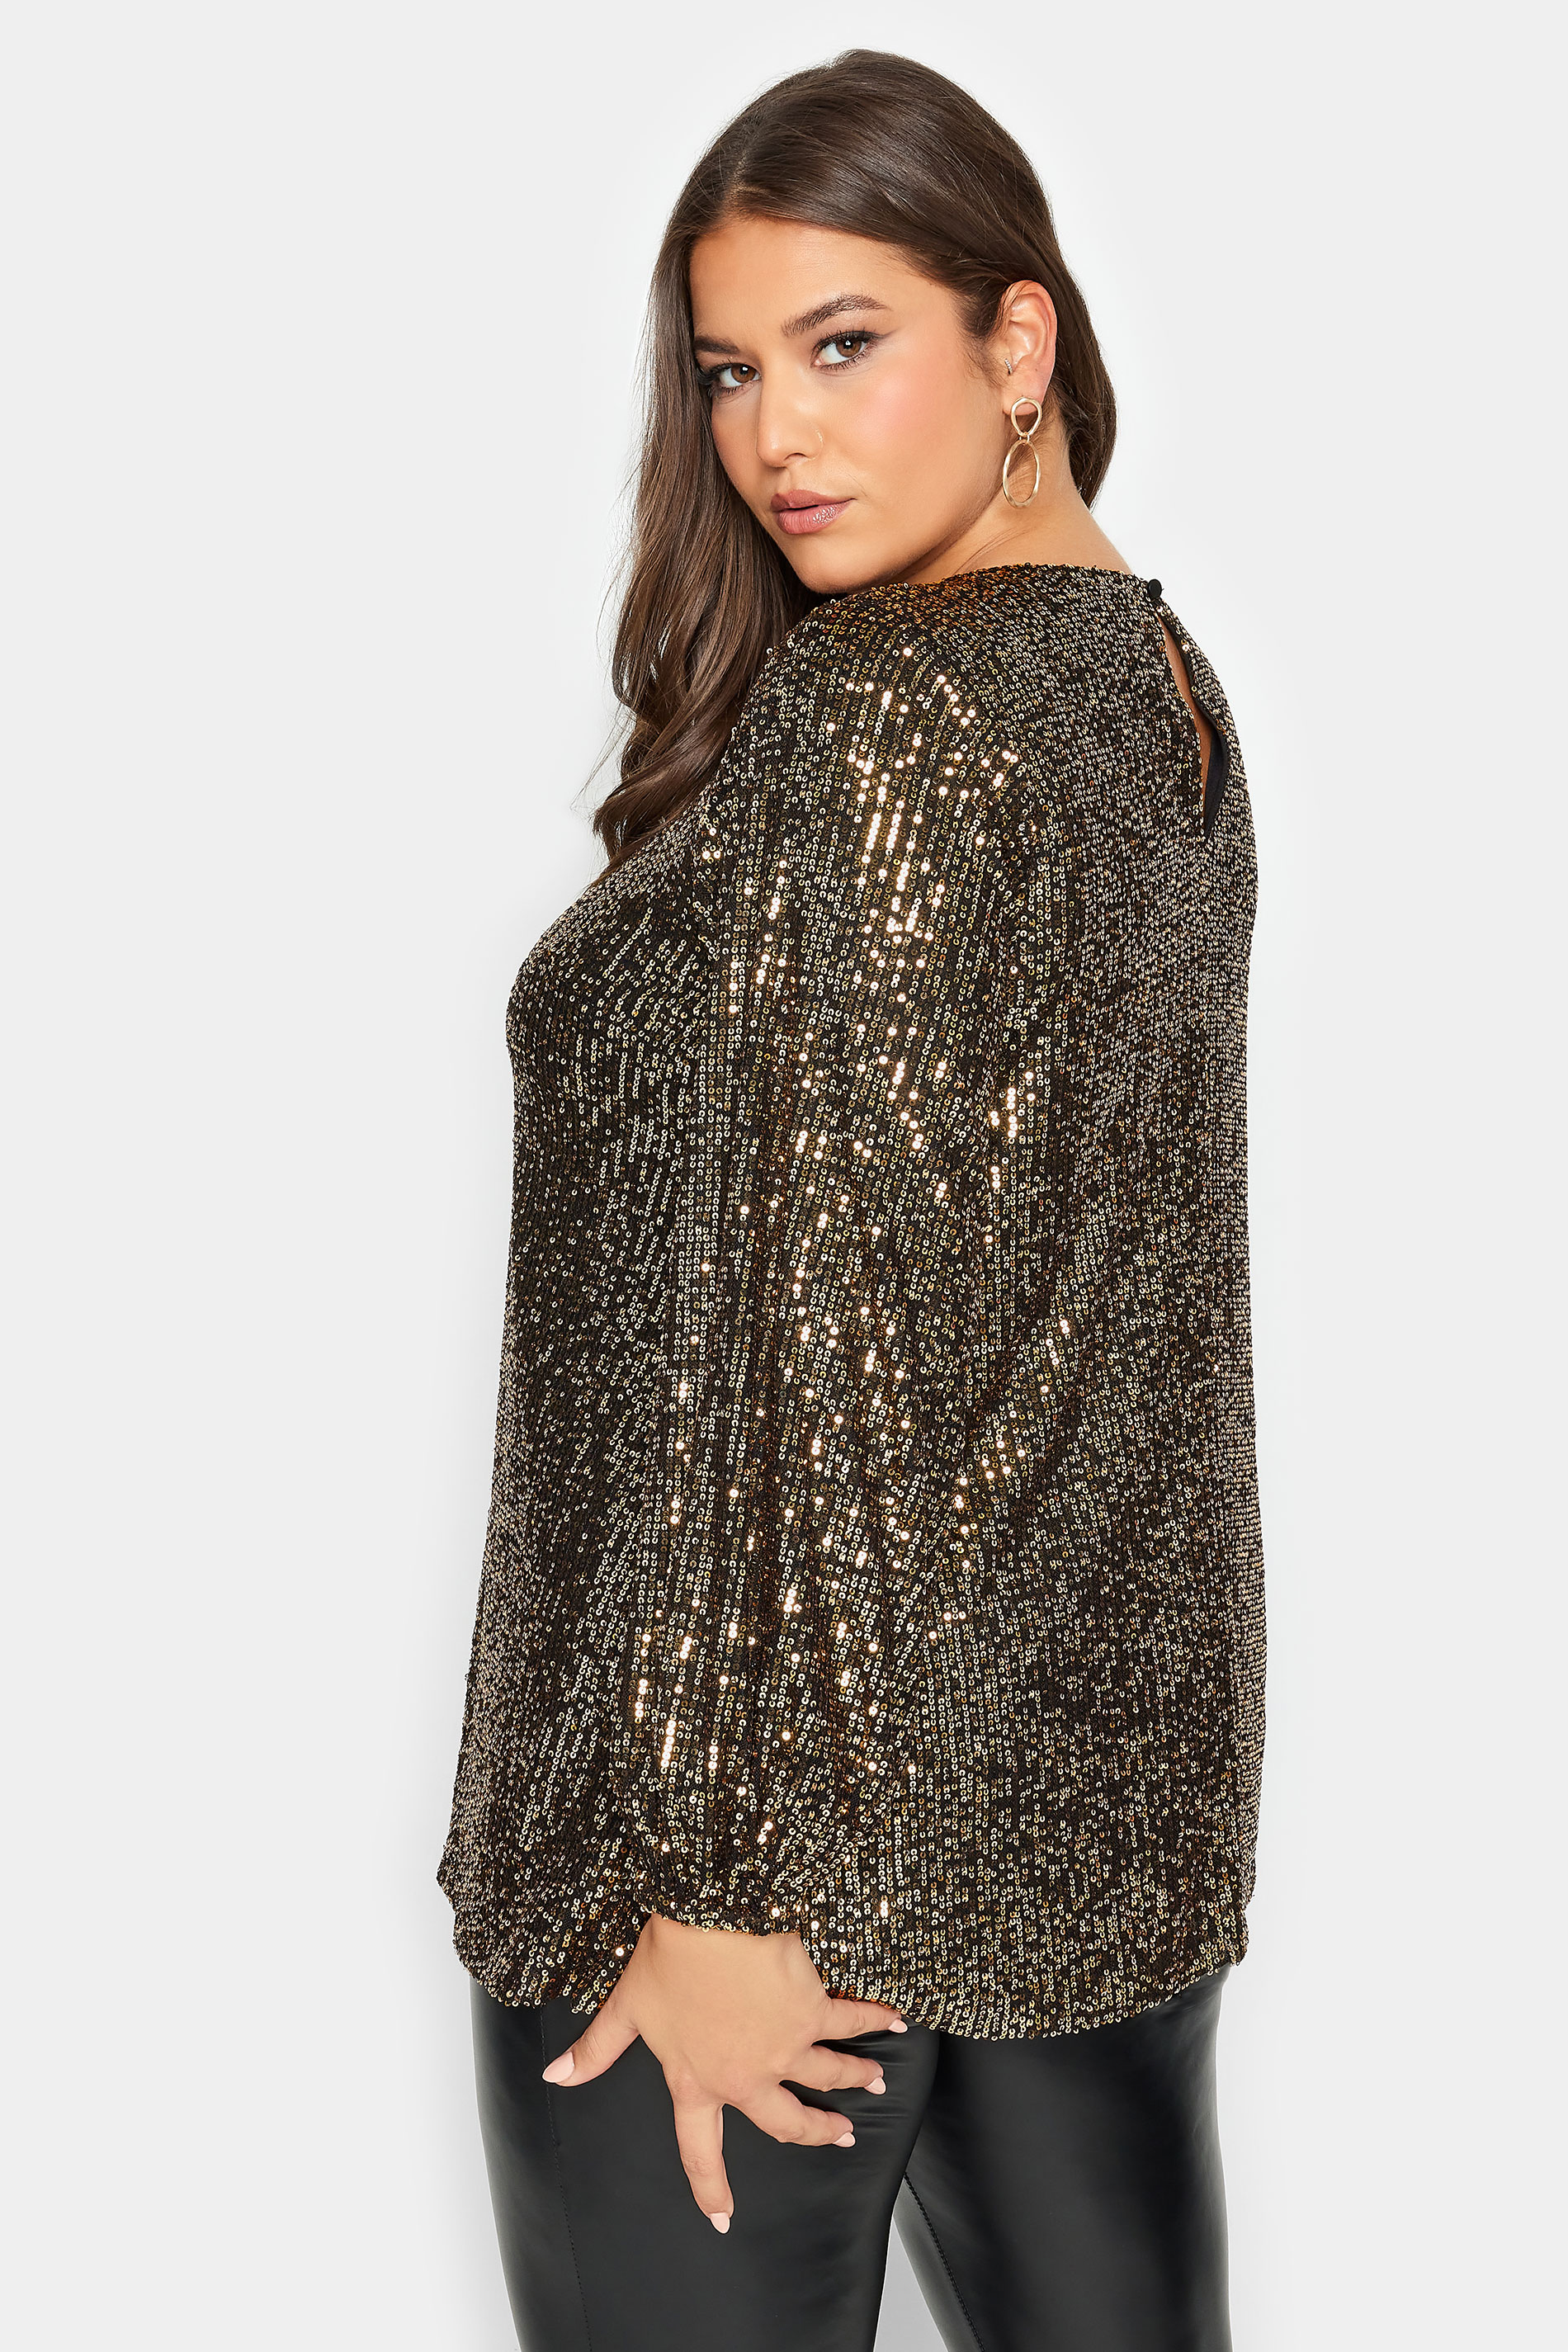 YOURS LONDON Plus Size Gold Sequin Swing Top